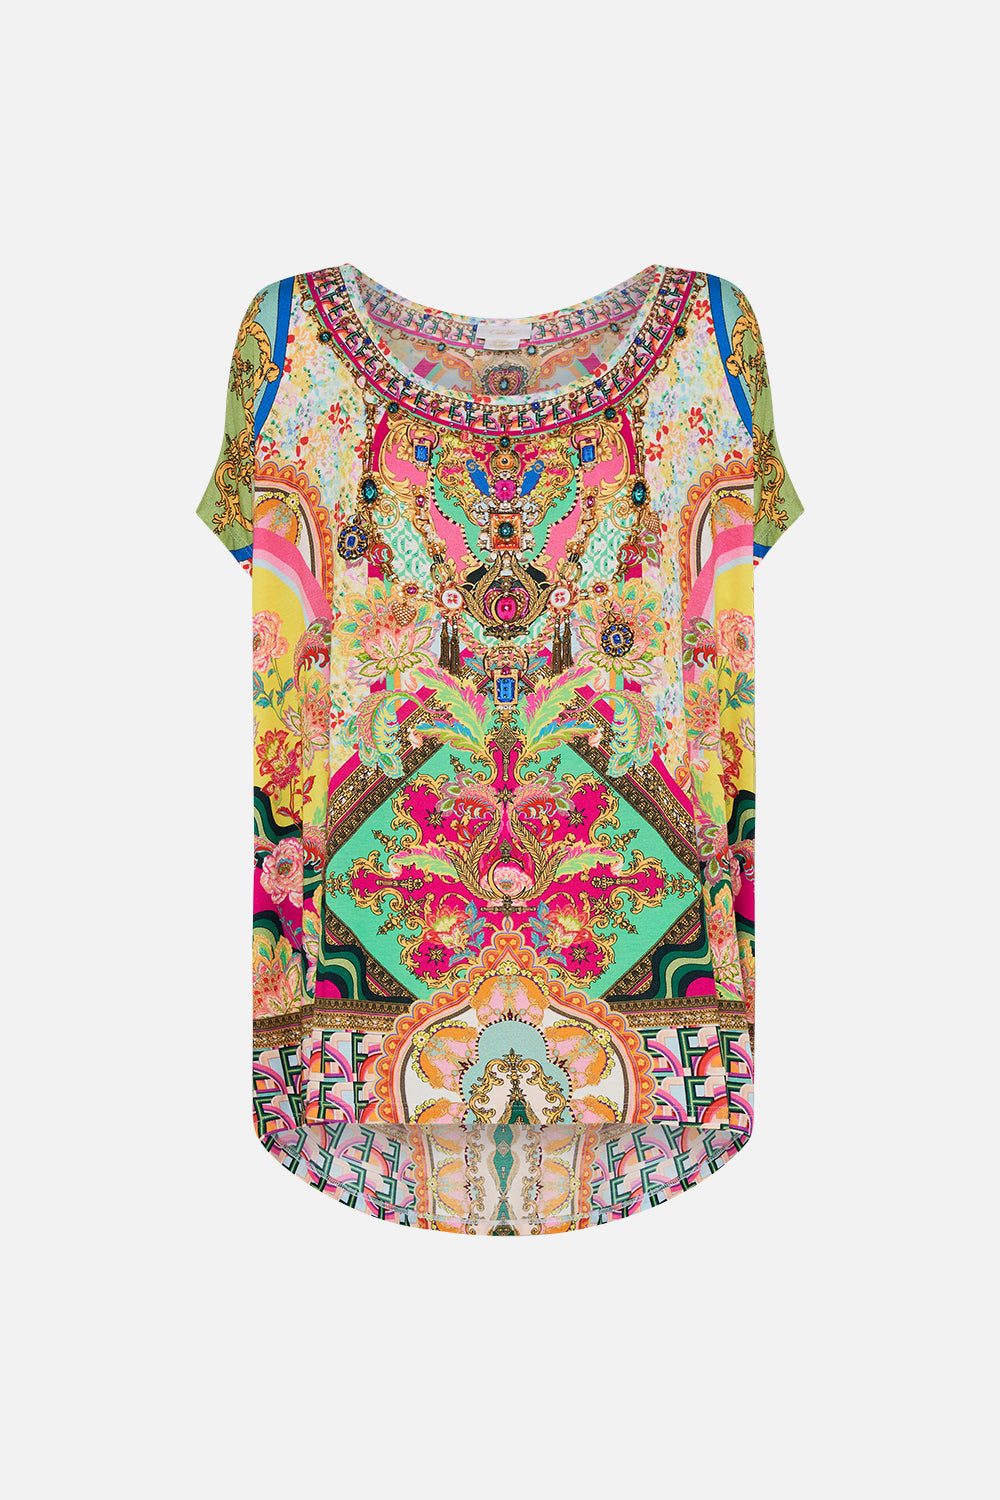 Product view of CAMILLA loose fit tee in Ciao Bella print